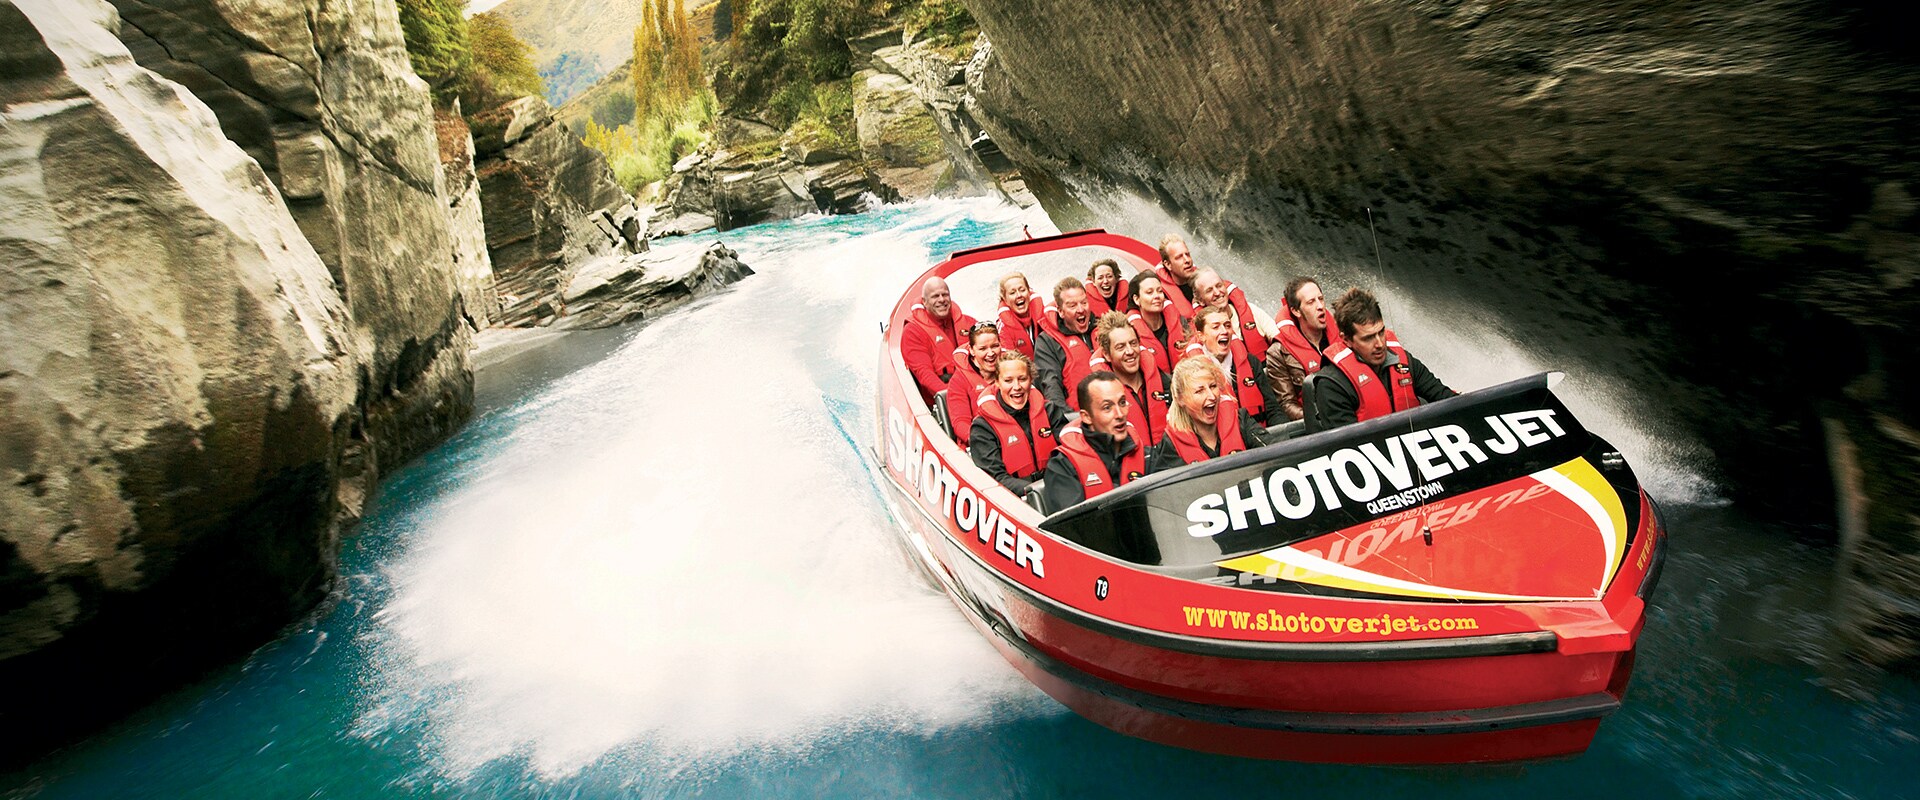 Have a thrill seeking experience in Queenstown on the Shootover Jet Boat ride.